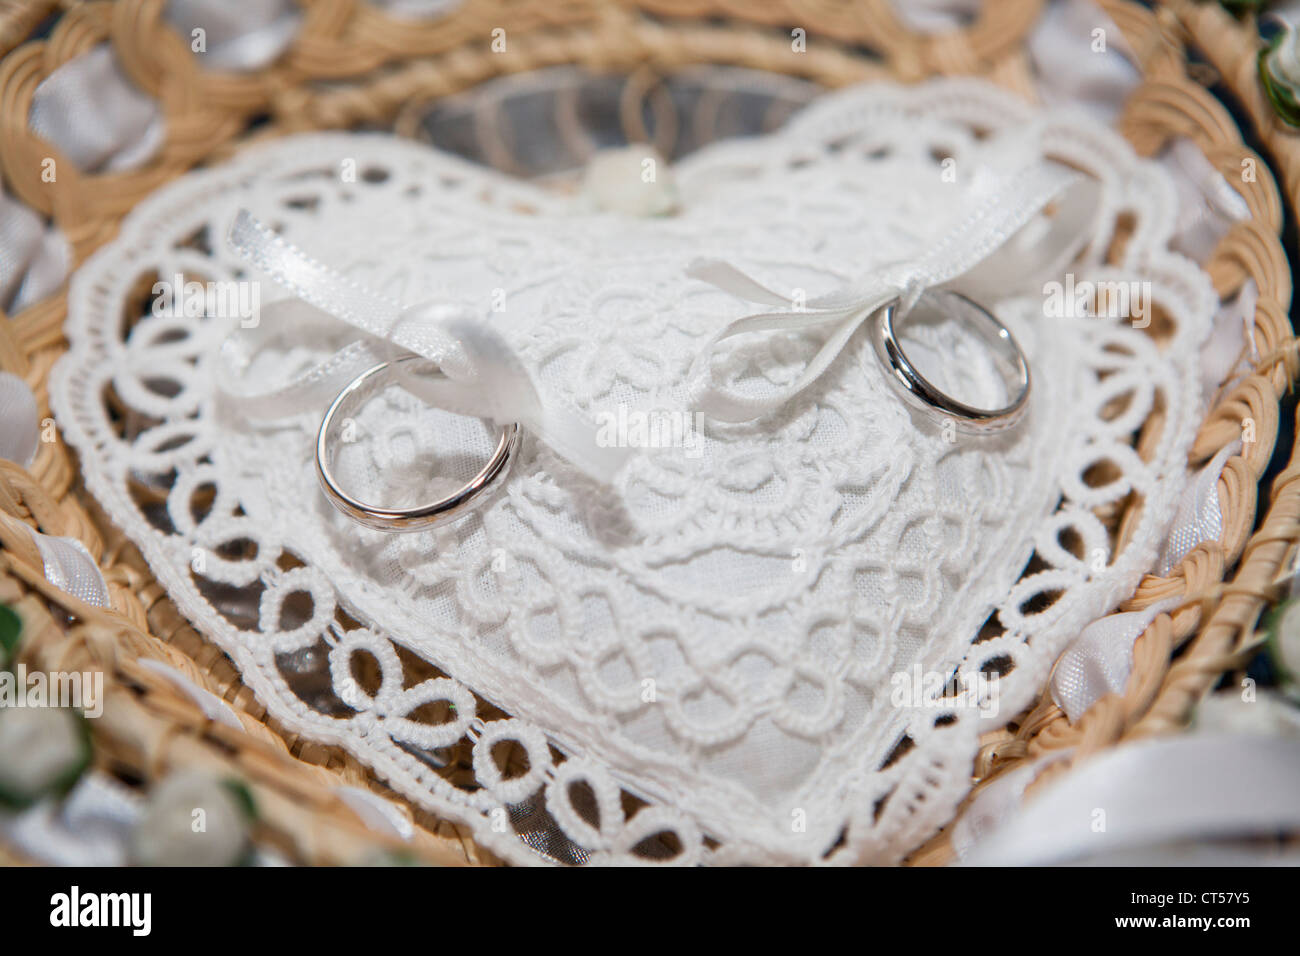 Wedding rings in a wicker basket with a white embroidered cushion close up Stock Photo